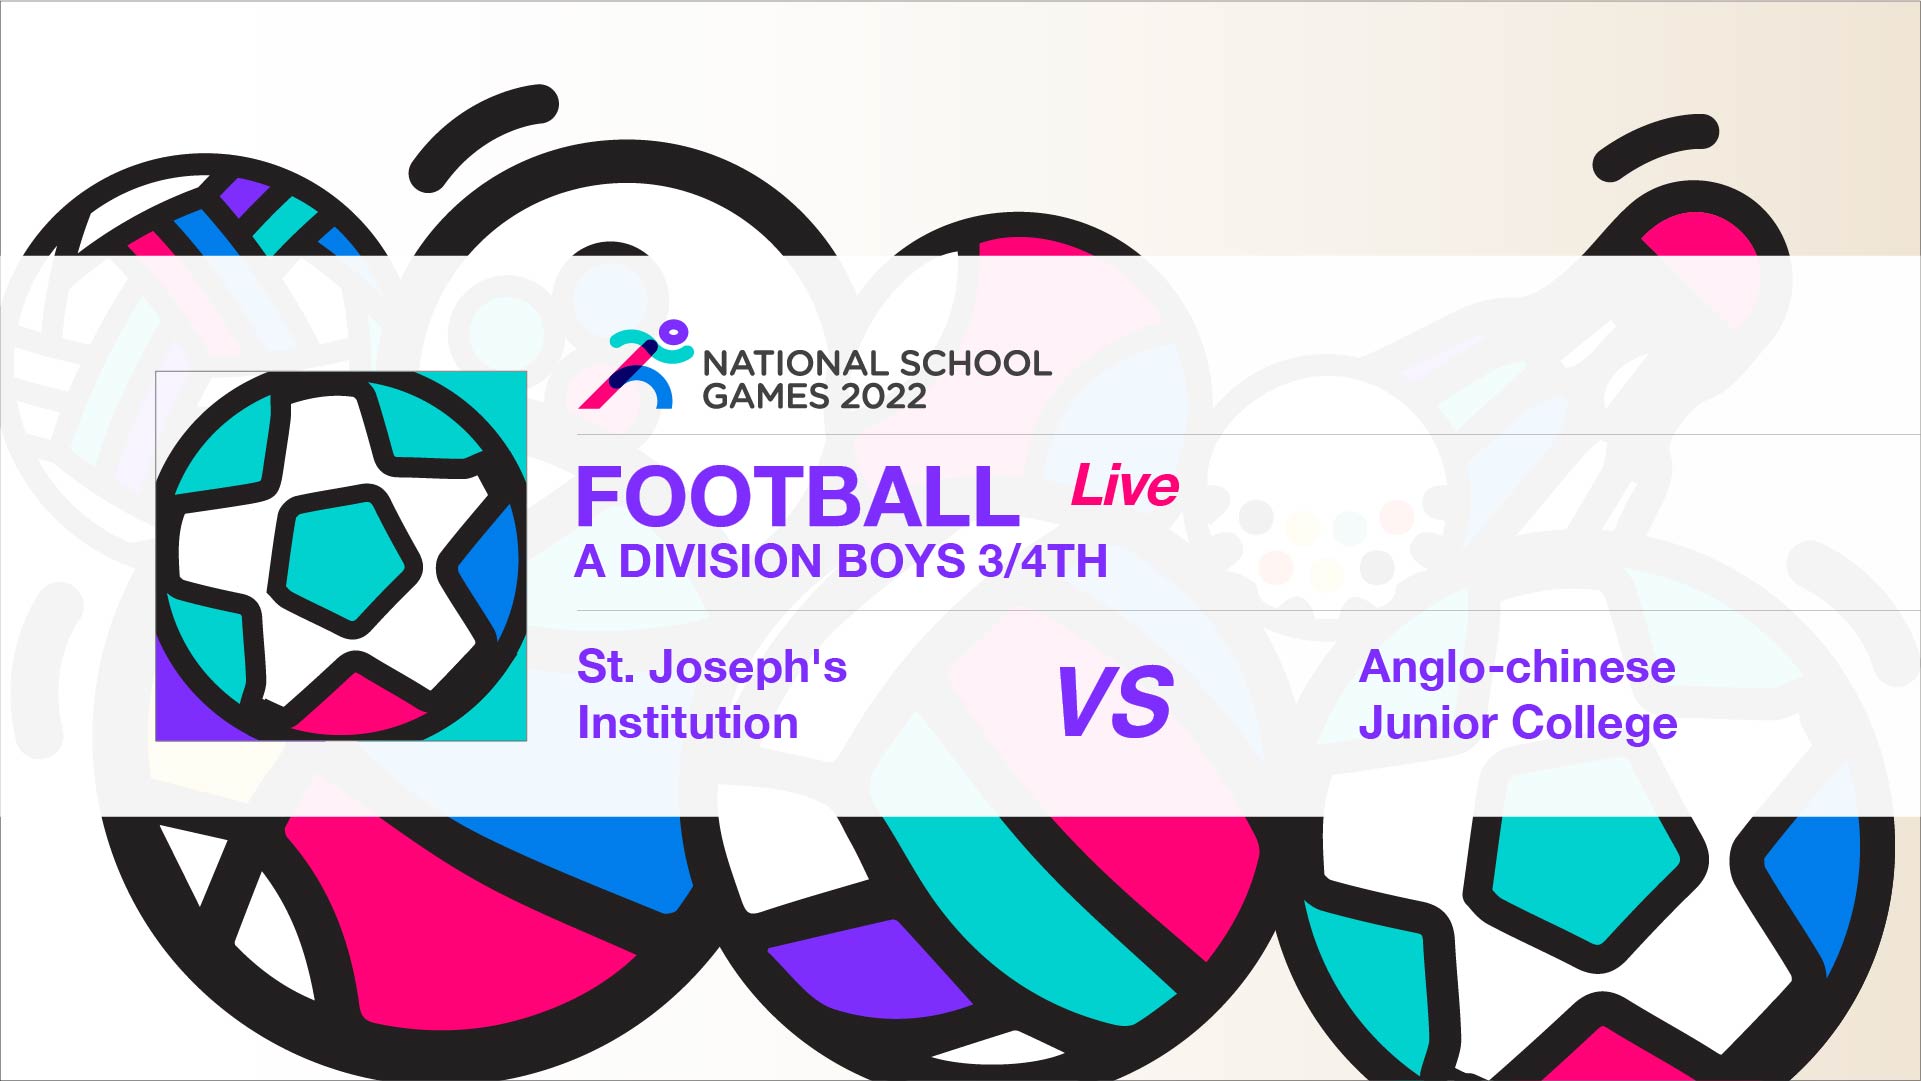 SSSC Football A Division Boys 3rd/4th | St. Joseph's institution vs Anglo-Chinese Junior College - Highlights